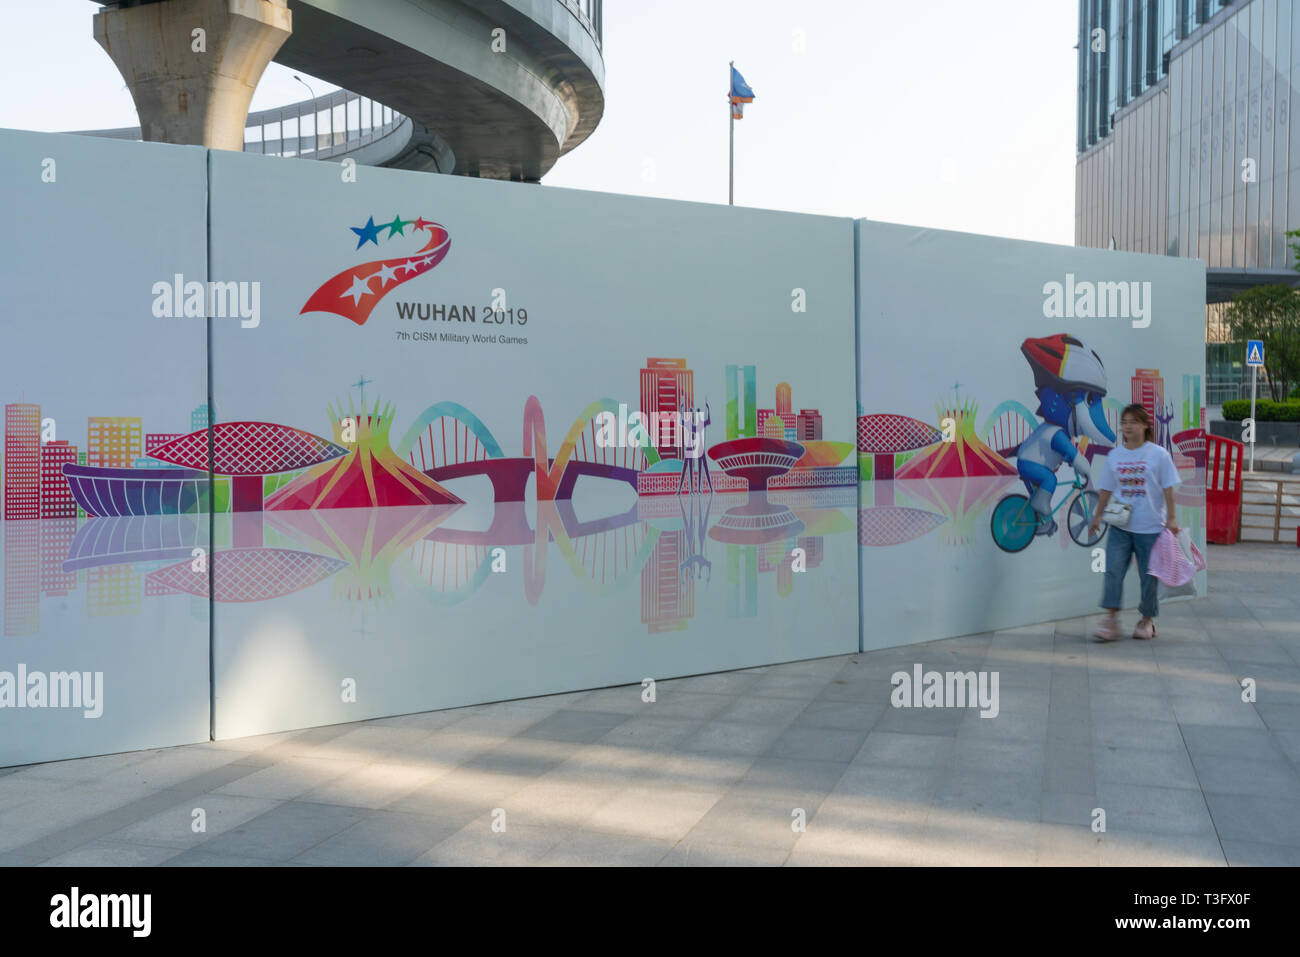 6 April 2019, Wuhan China : Woman walking in front of a giant board advertising the 7th Summer CISM military world games a major sport event in Wuhan  Stock Photo